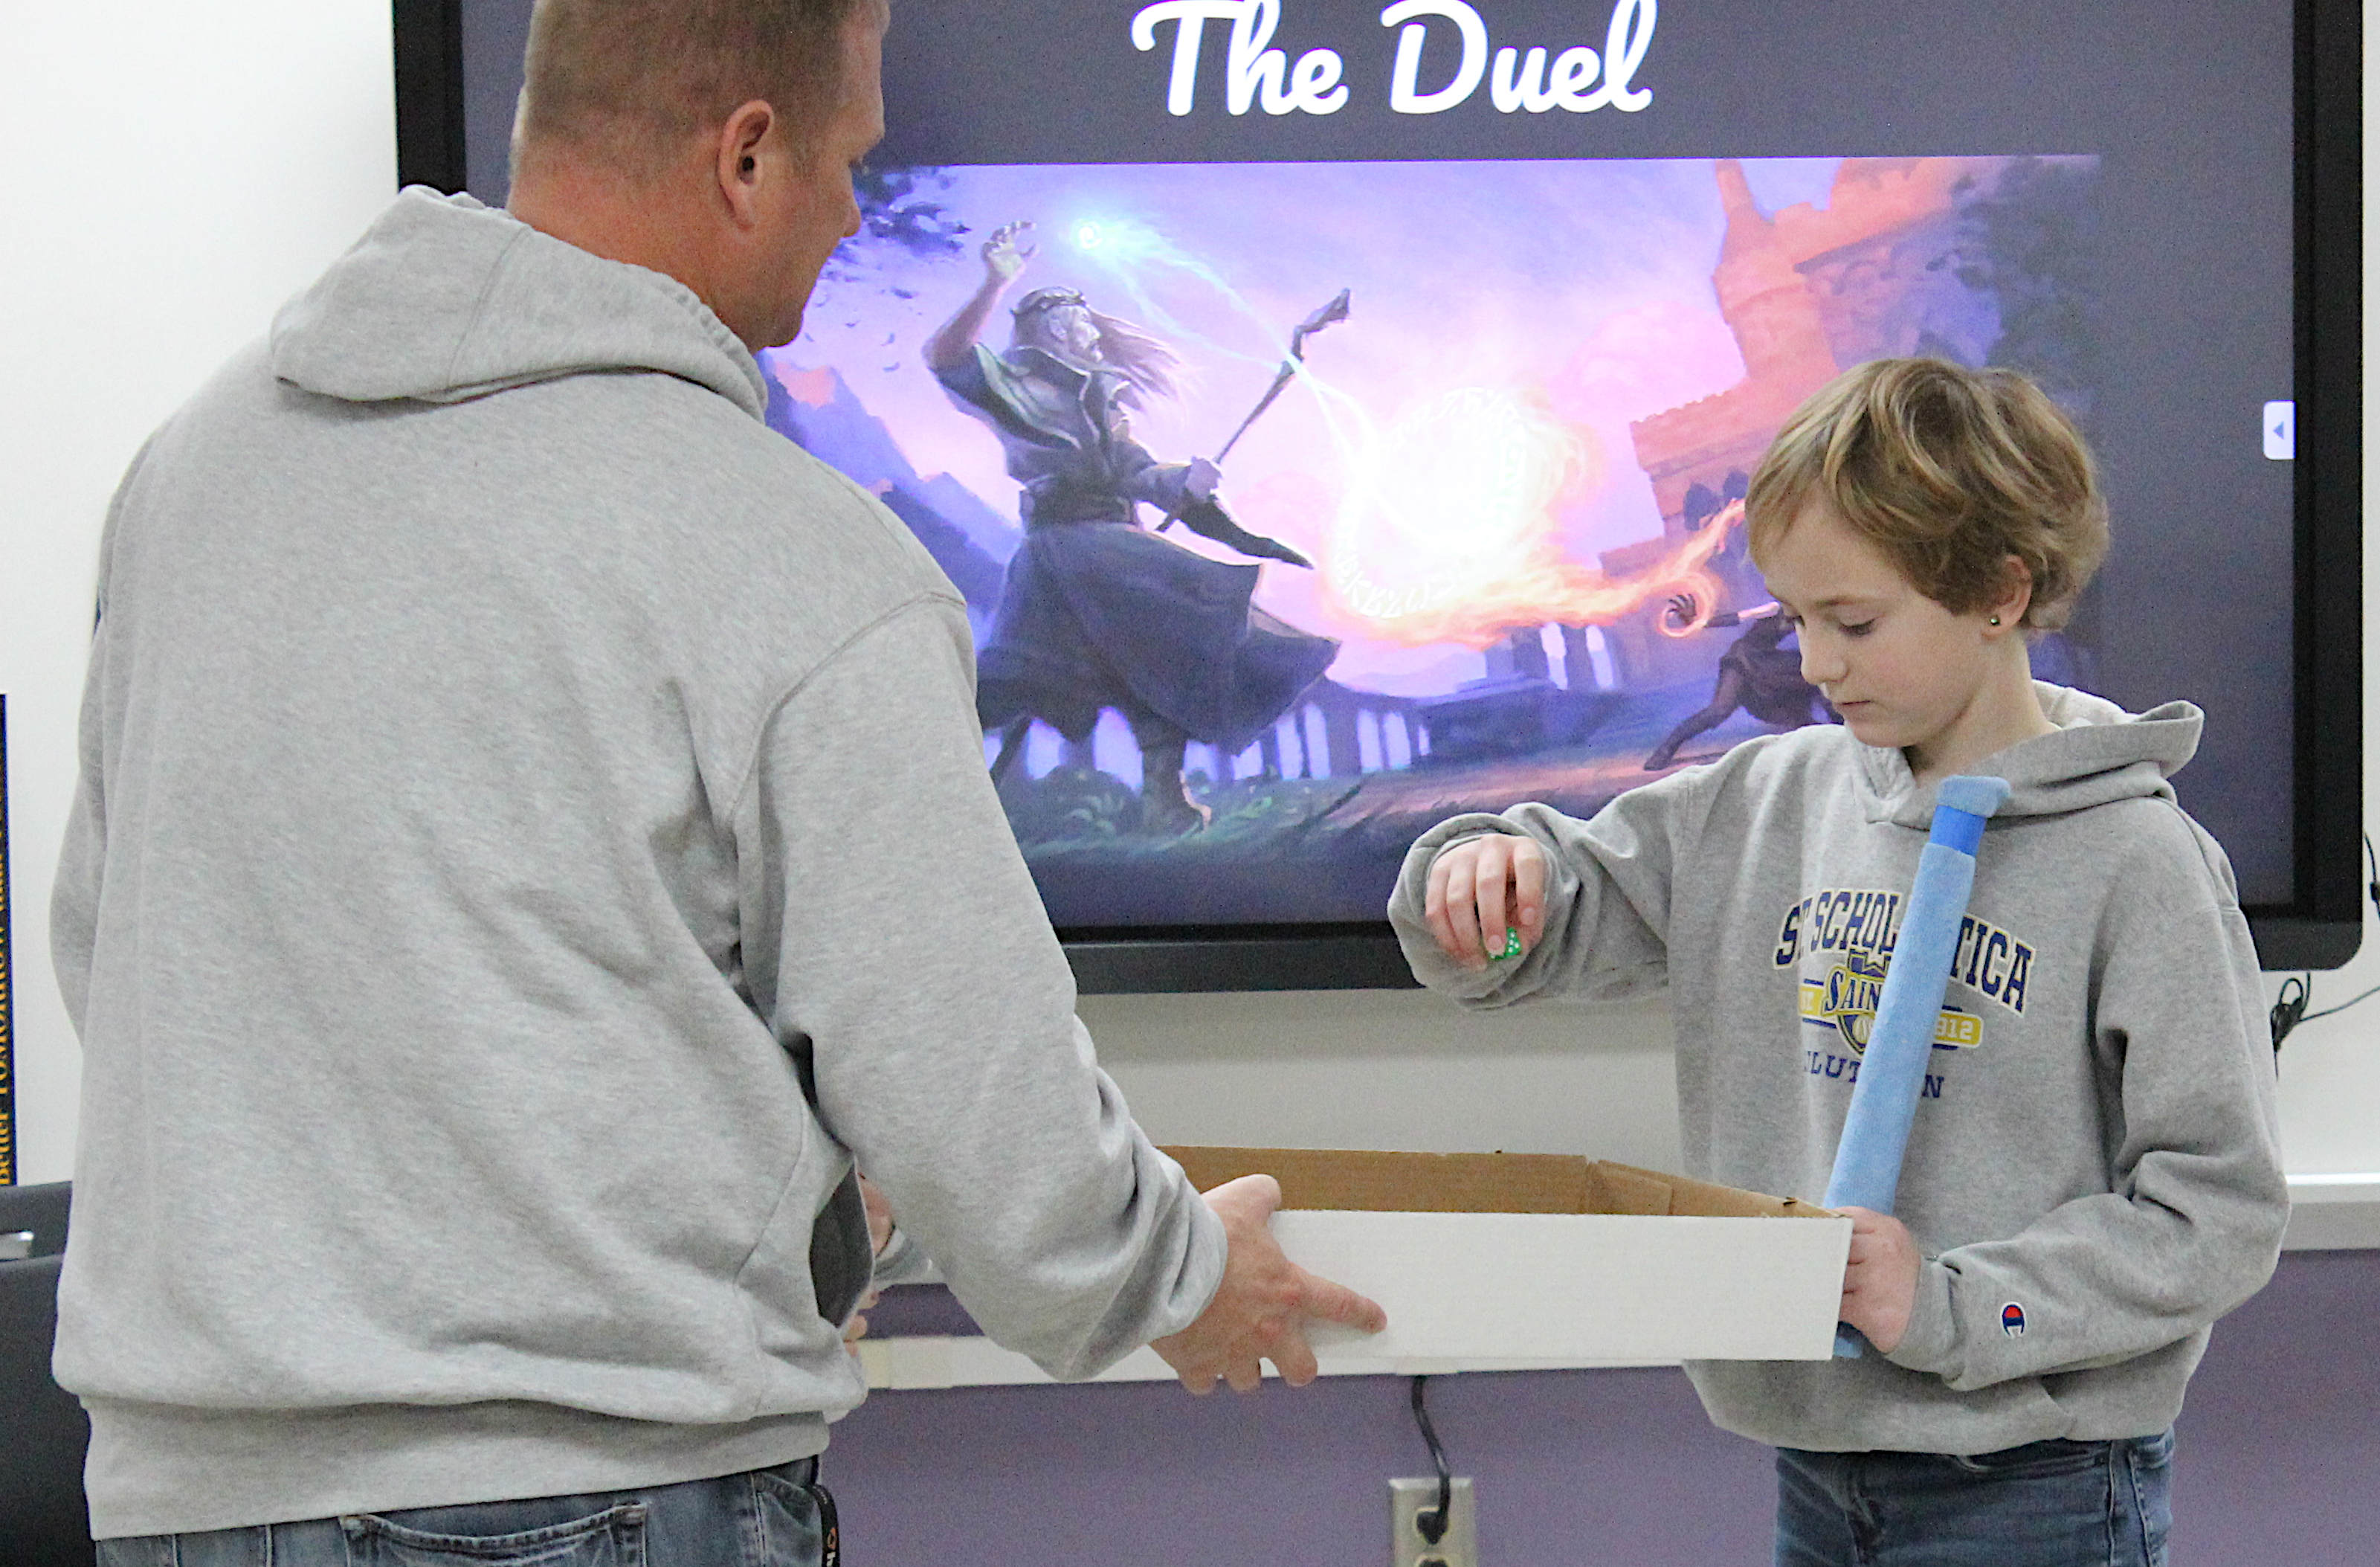 Students prepare for a duel in Mr. Killen's science class